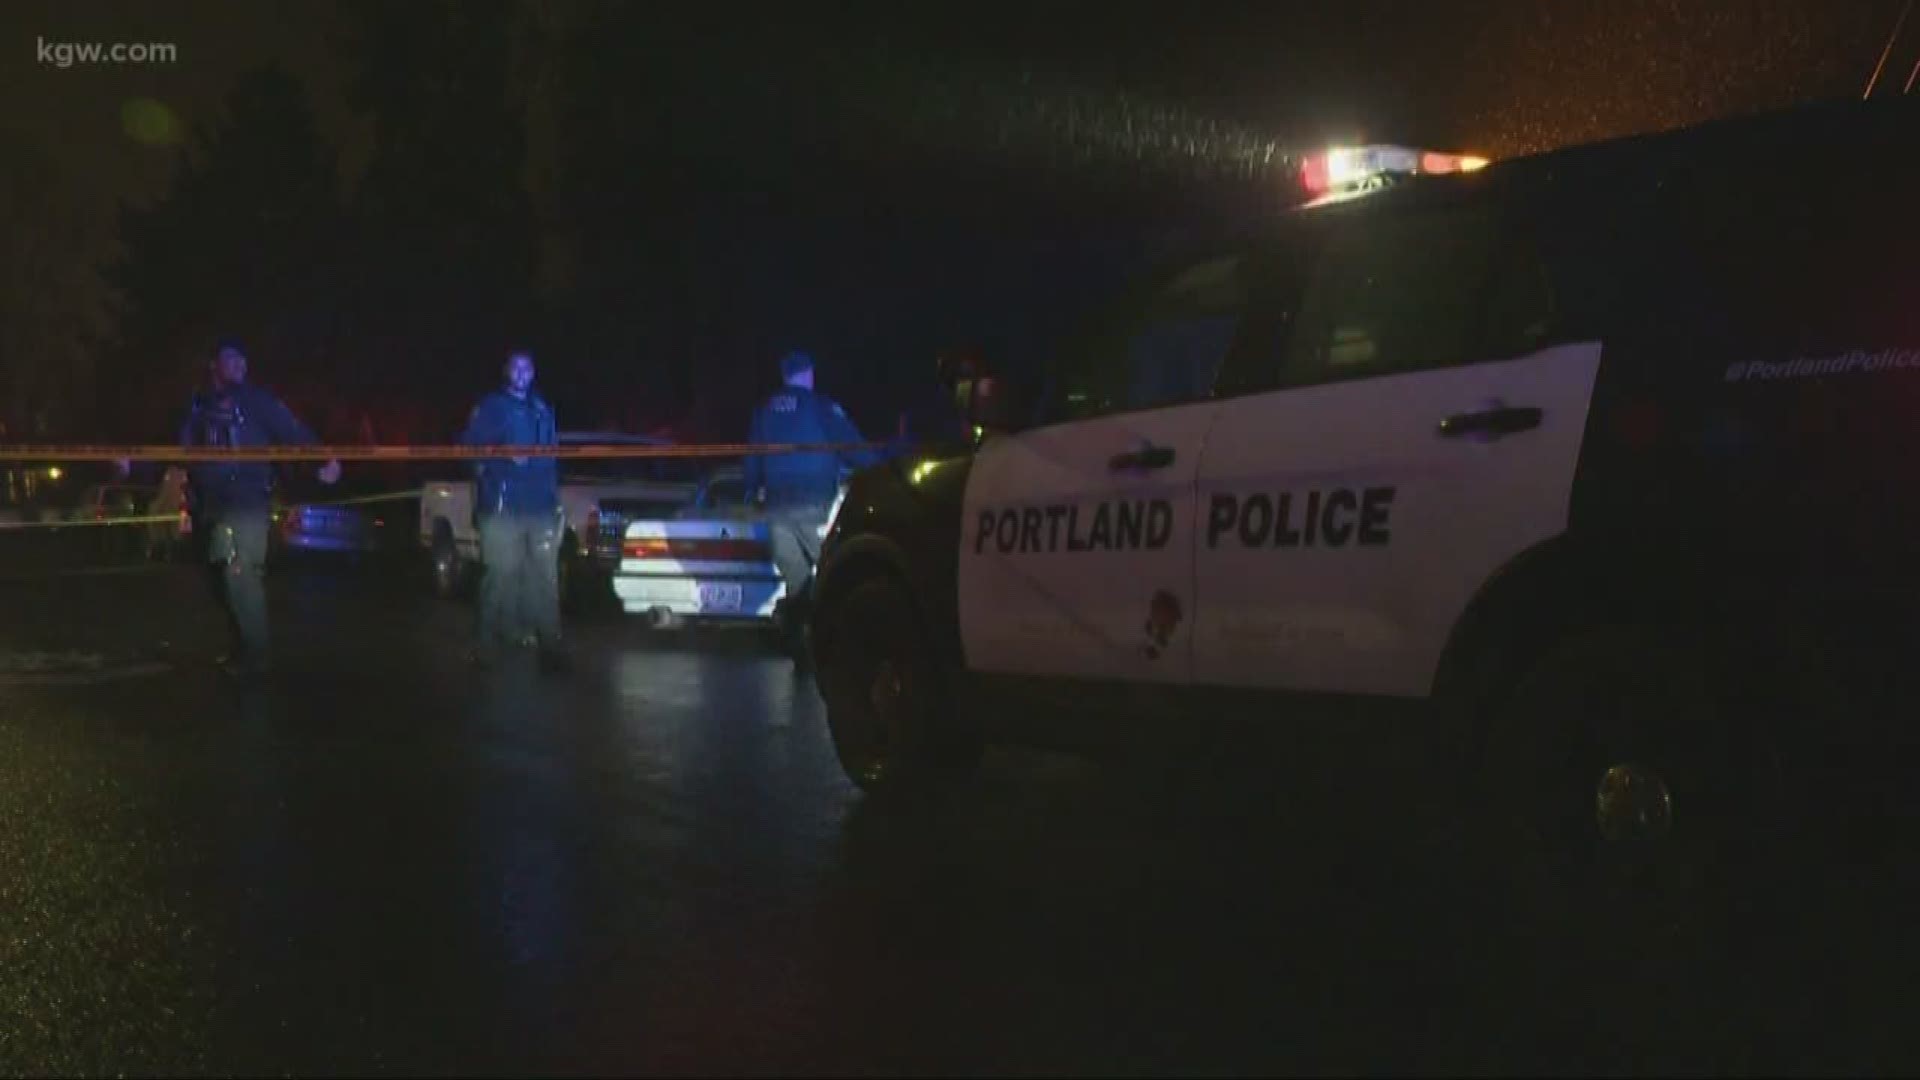 Portland police said they don’t think the shootings are connected. No arrests have been made, and only person was injured.